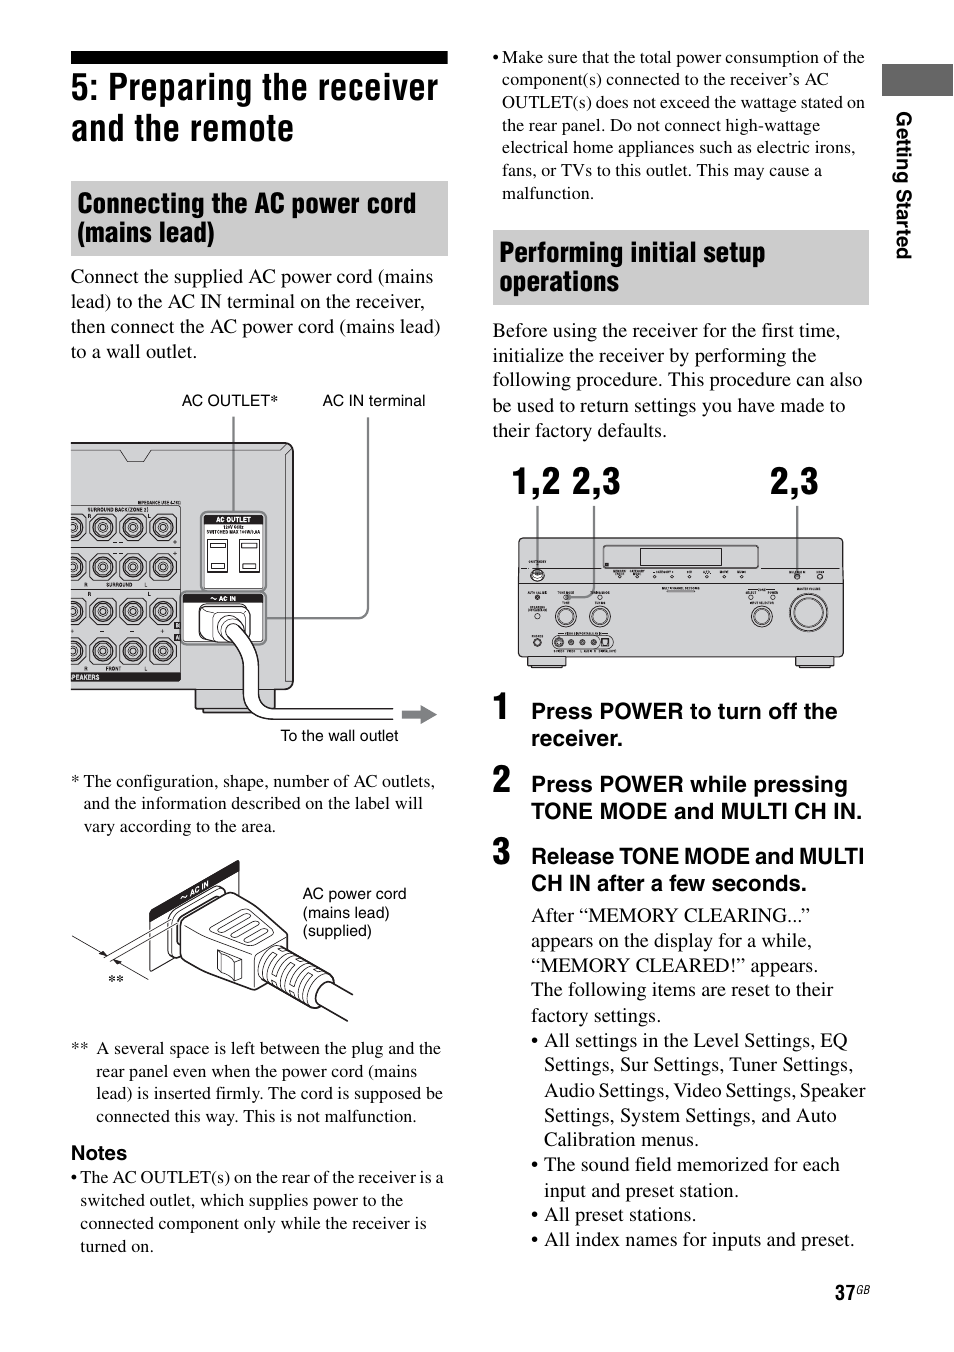 Preparing the receiver and the remote, Connecting the ac power cord (mains lead), Performing initial setup operations | Sony STR-DG1000 User Manual | Page 37 / 123